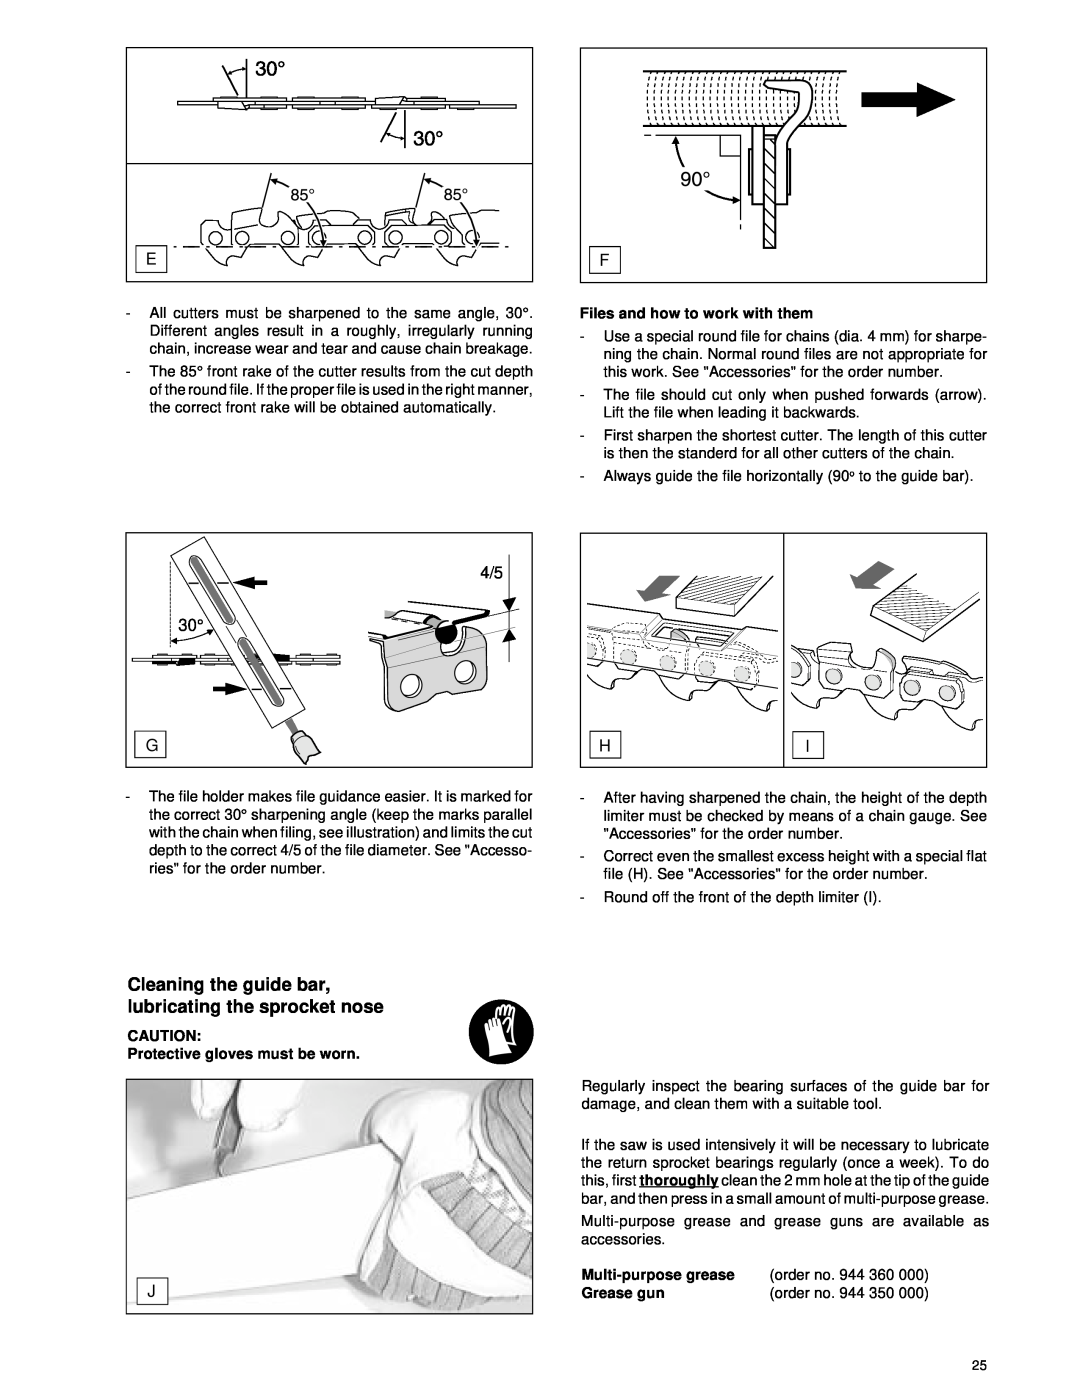 Makita Chain Saw manual Cleaning the guide bar, lubricating the sprocket nose, Files and how to work with them, order no 